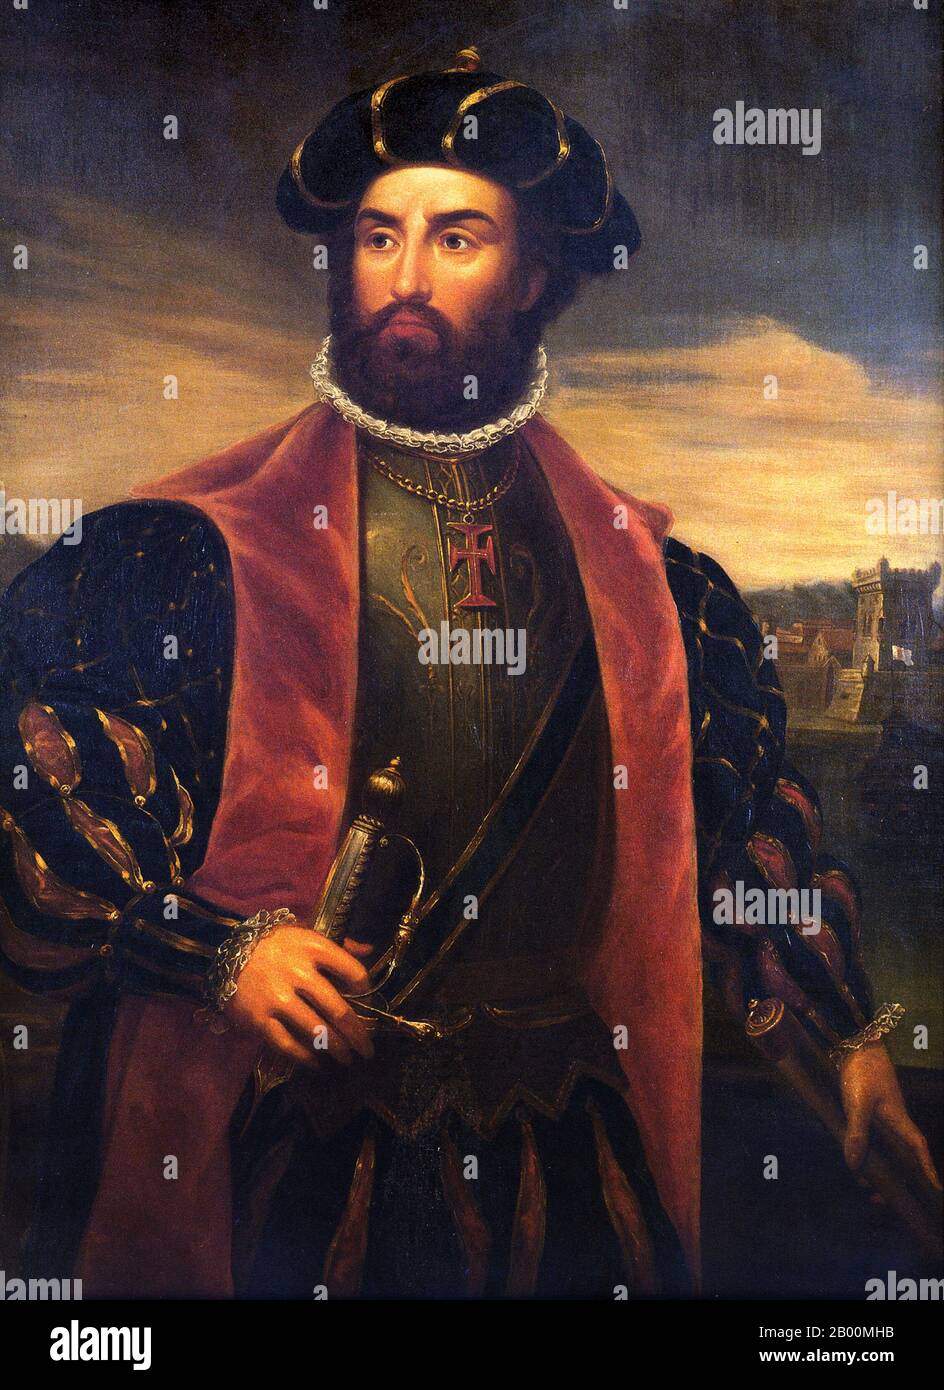 Portugal: 'Vasco da Gama (1460 or 1469 – 1524), Explorer and Imperialist'. Oil on canvas painting by Antonio Manuel da Fonseca (1796-1890), 1838.  Vasco da Gama, 1st Count of Vidigueira (1460 or 1469-1524) was a Portuguese explorer, one of the most successful in the European Age of Discovery and the commander of the first ships to sail directly from Europe to India. For a short time in 1524 he was Governor of Portuguese India under the title of Viceroy. Stock Photo